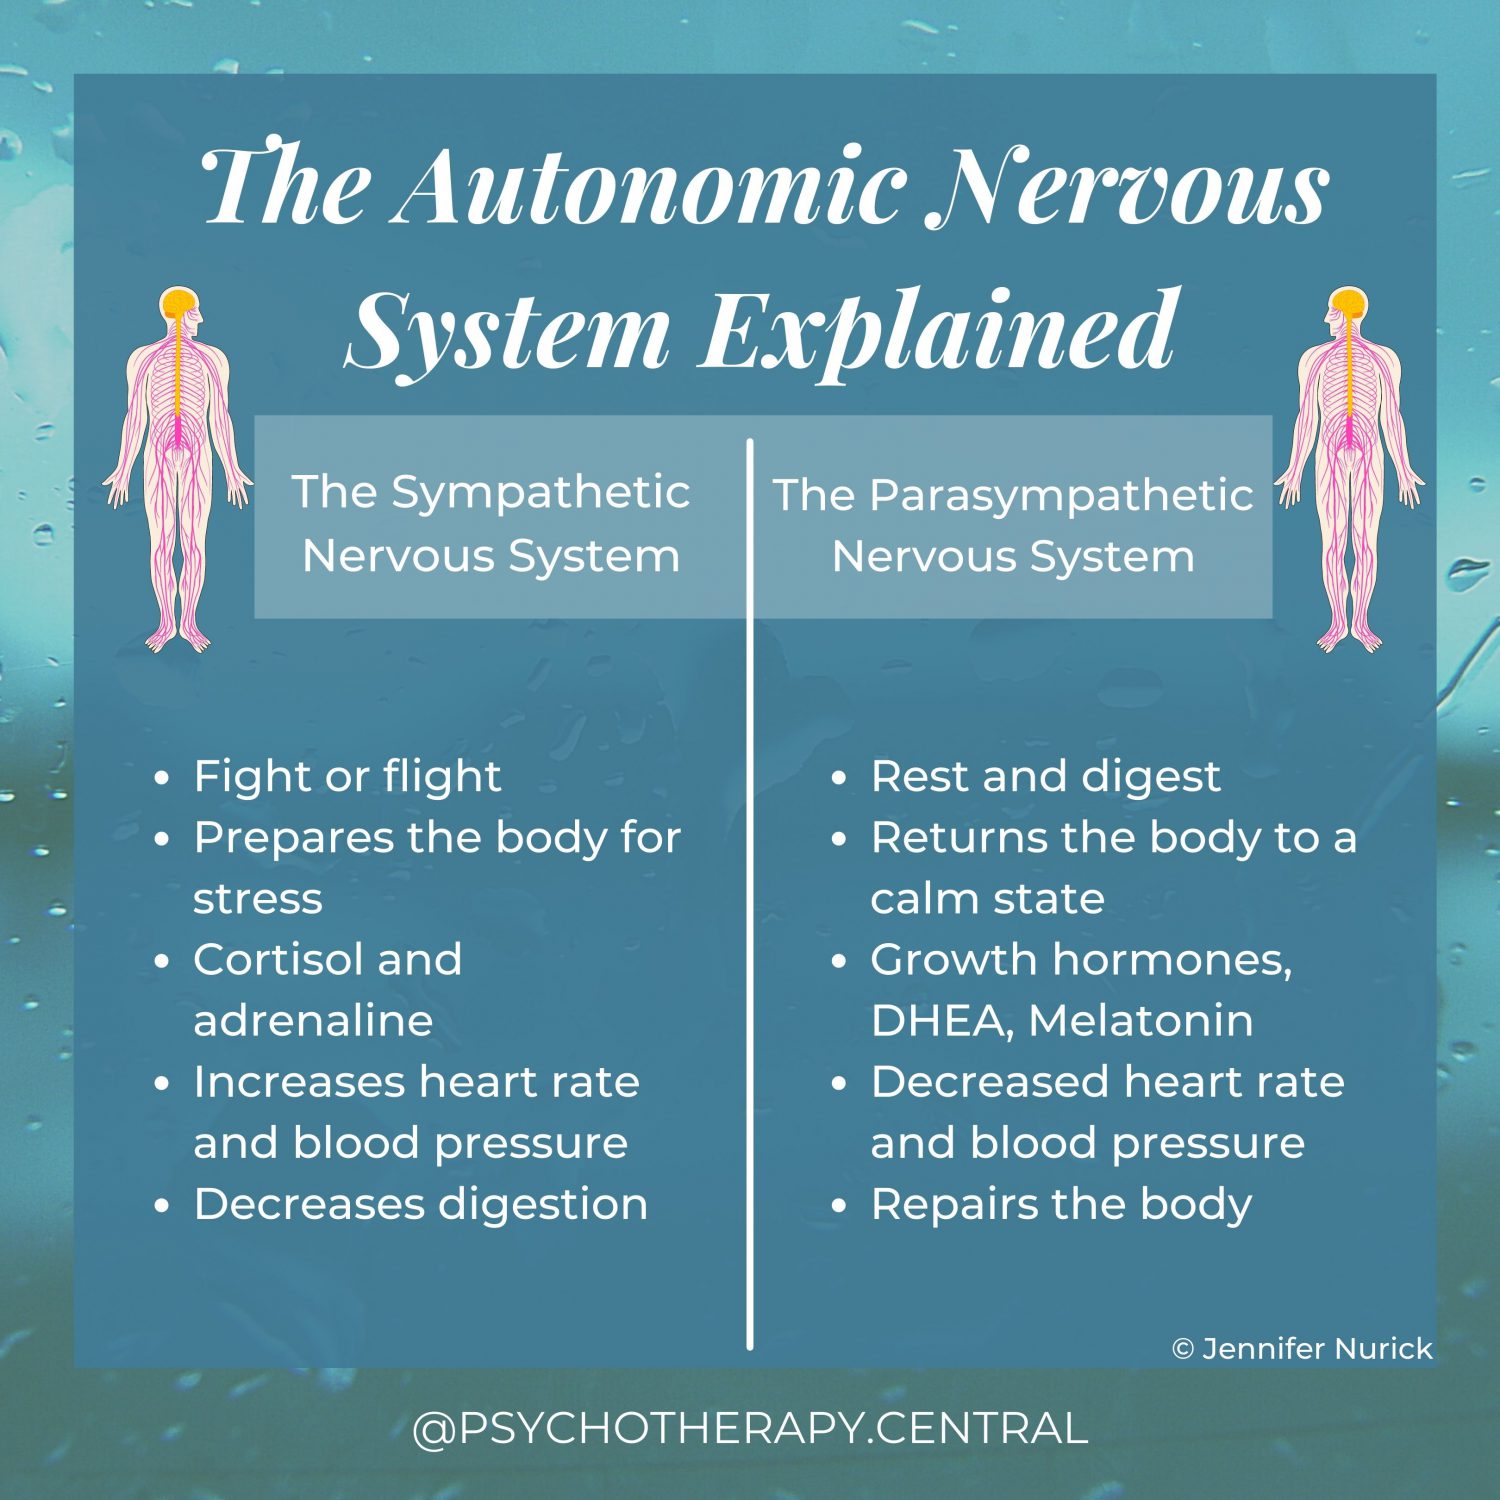 The Autonomic Nervous System Explained Sympathetic Fight or flight Prepares the body for stress Cortisol and adrenaline Increases heart rate and blood pressure Decreases digestion Parasympathetic Rest and digest Returns the body to a calm state Growth hormones, DHEA, Melatonin Decreases heart rate Repairs the body